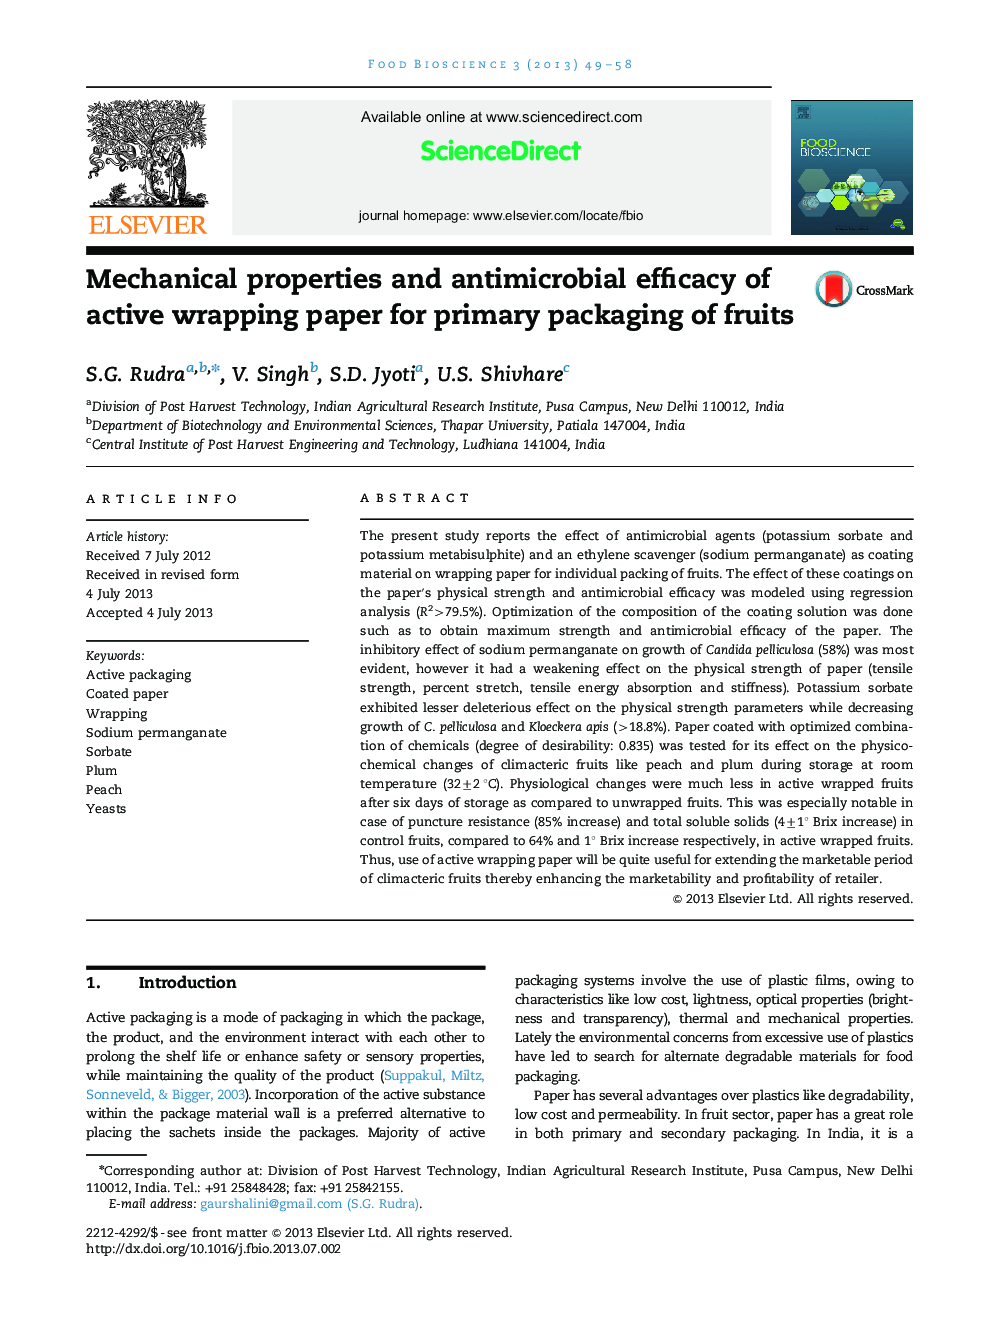 Mechanical properties and antimicrobial efficacy of active wrapping paper for primary packaging of fruits